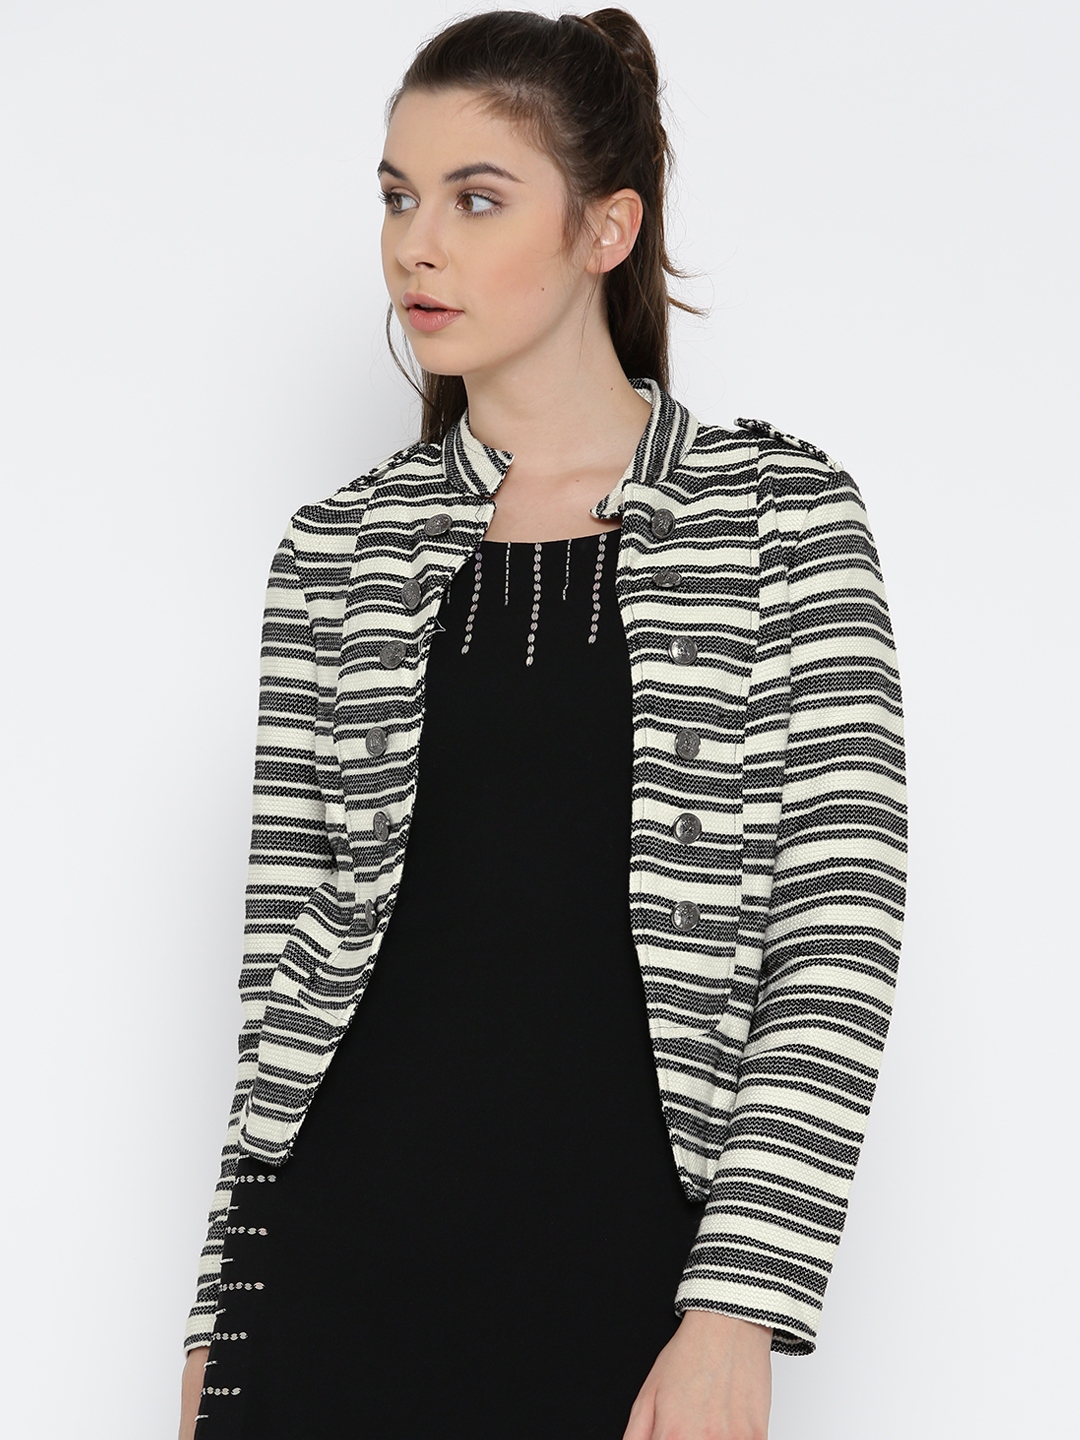 Buy ONLY Black & White Striped Jacket - Jackets for Women 1164472 | Myntra